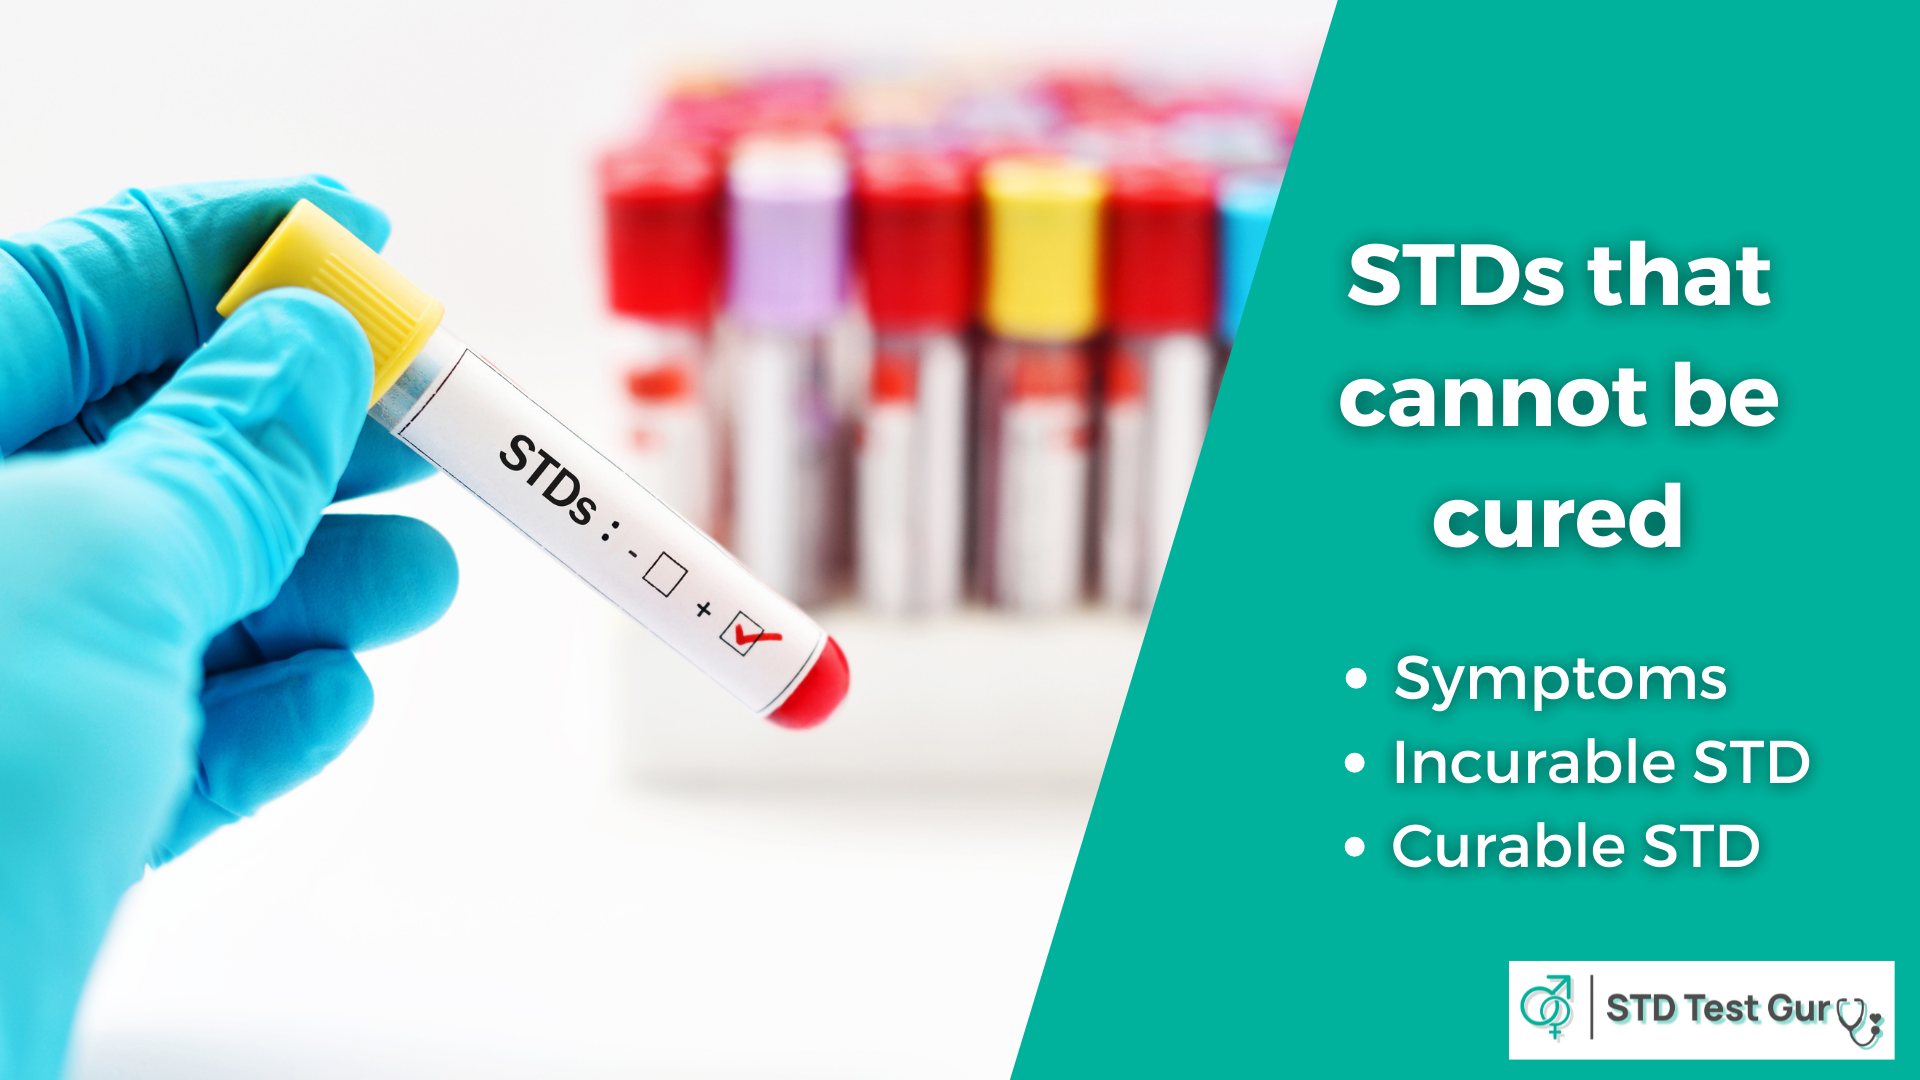 STDs that cannot be cured